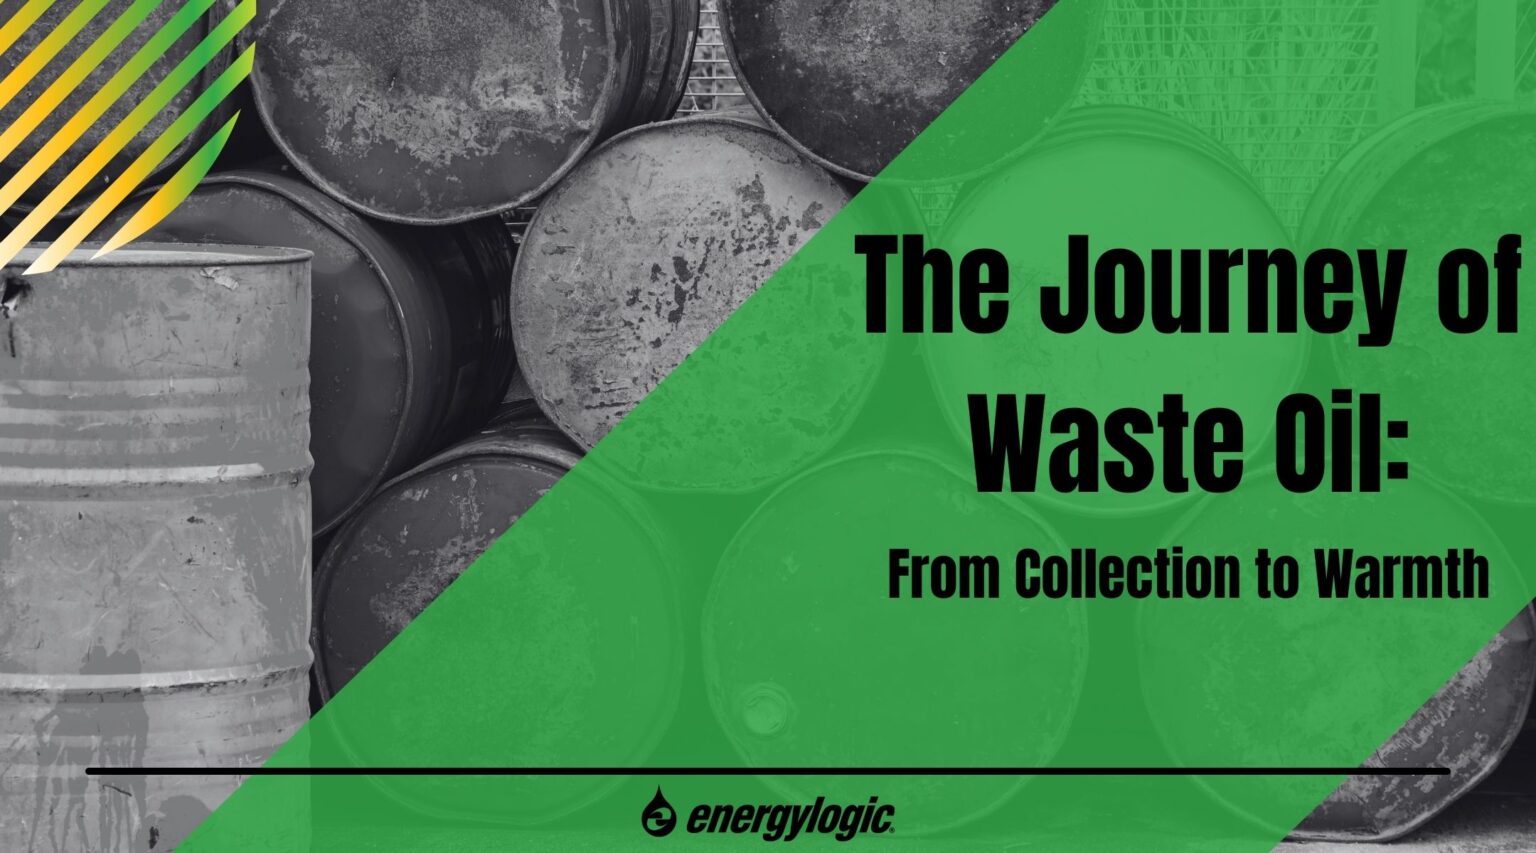 The Journey of Waste Oil